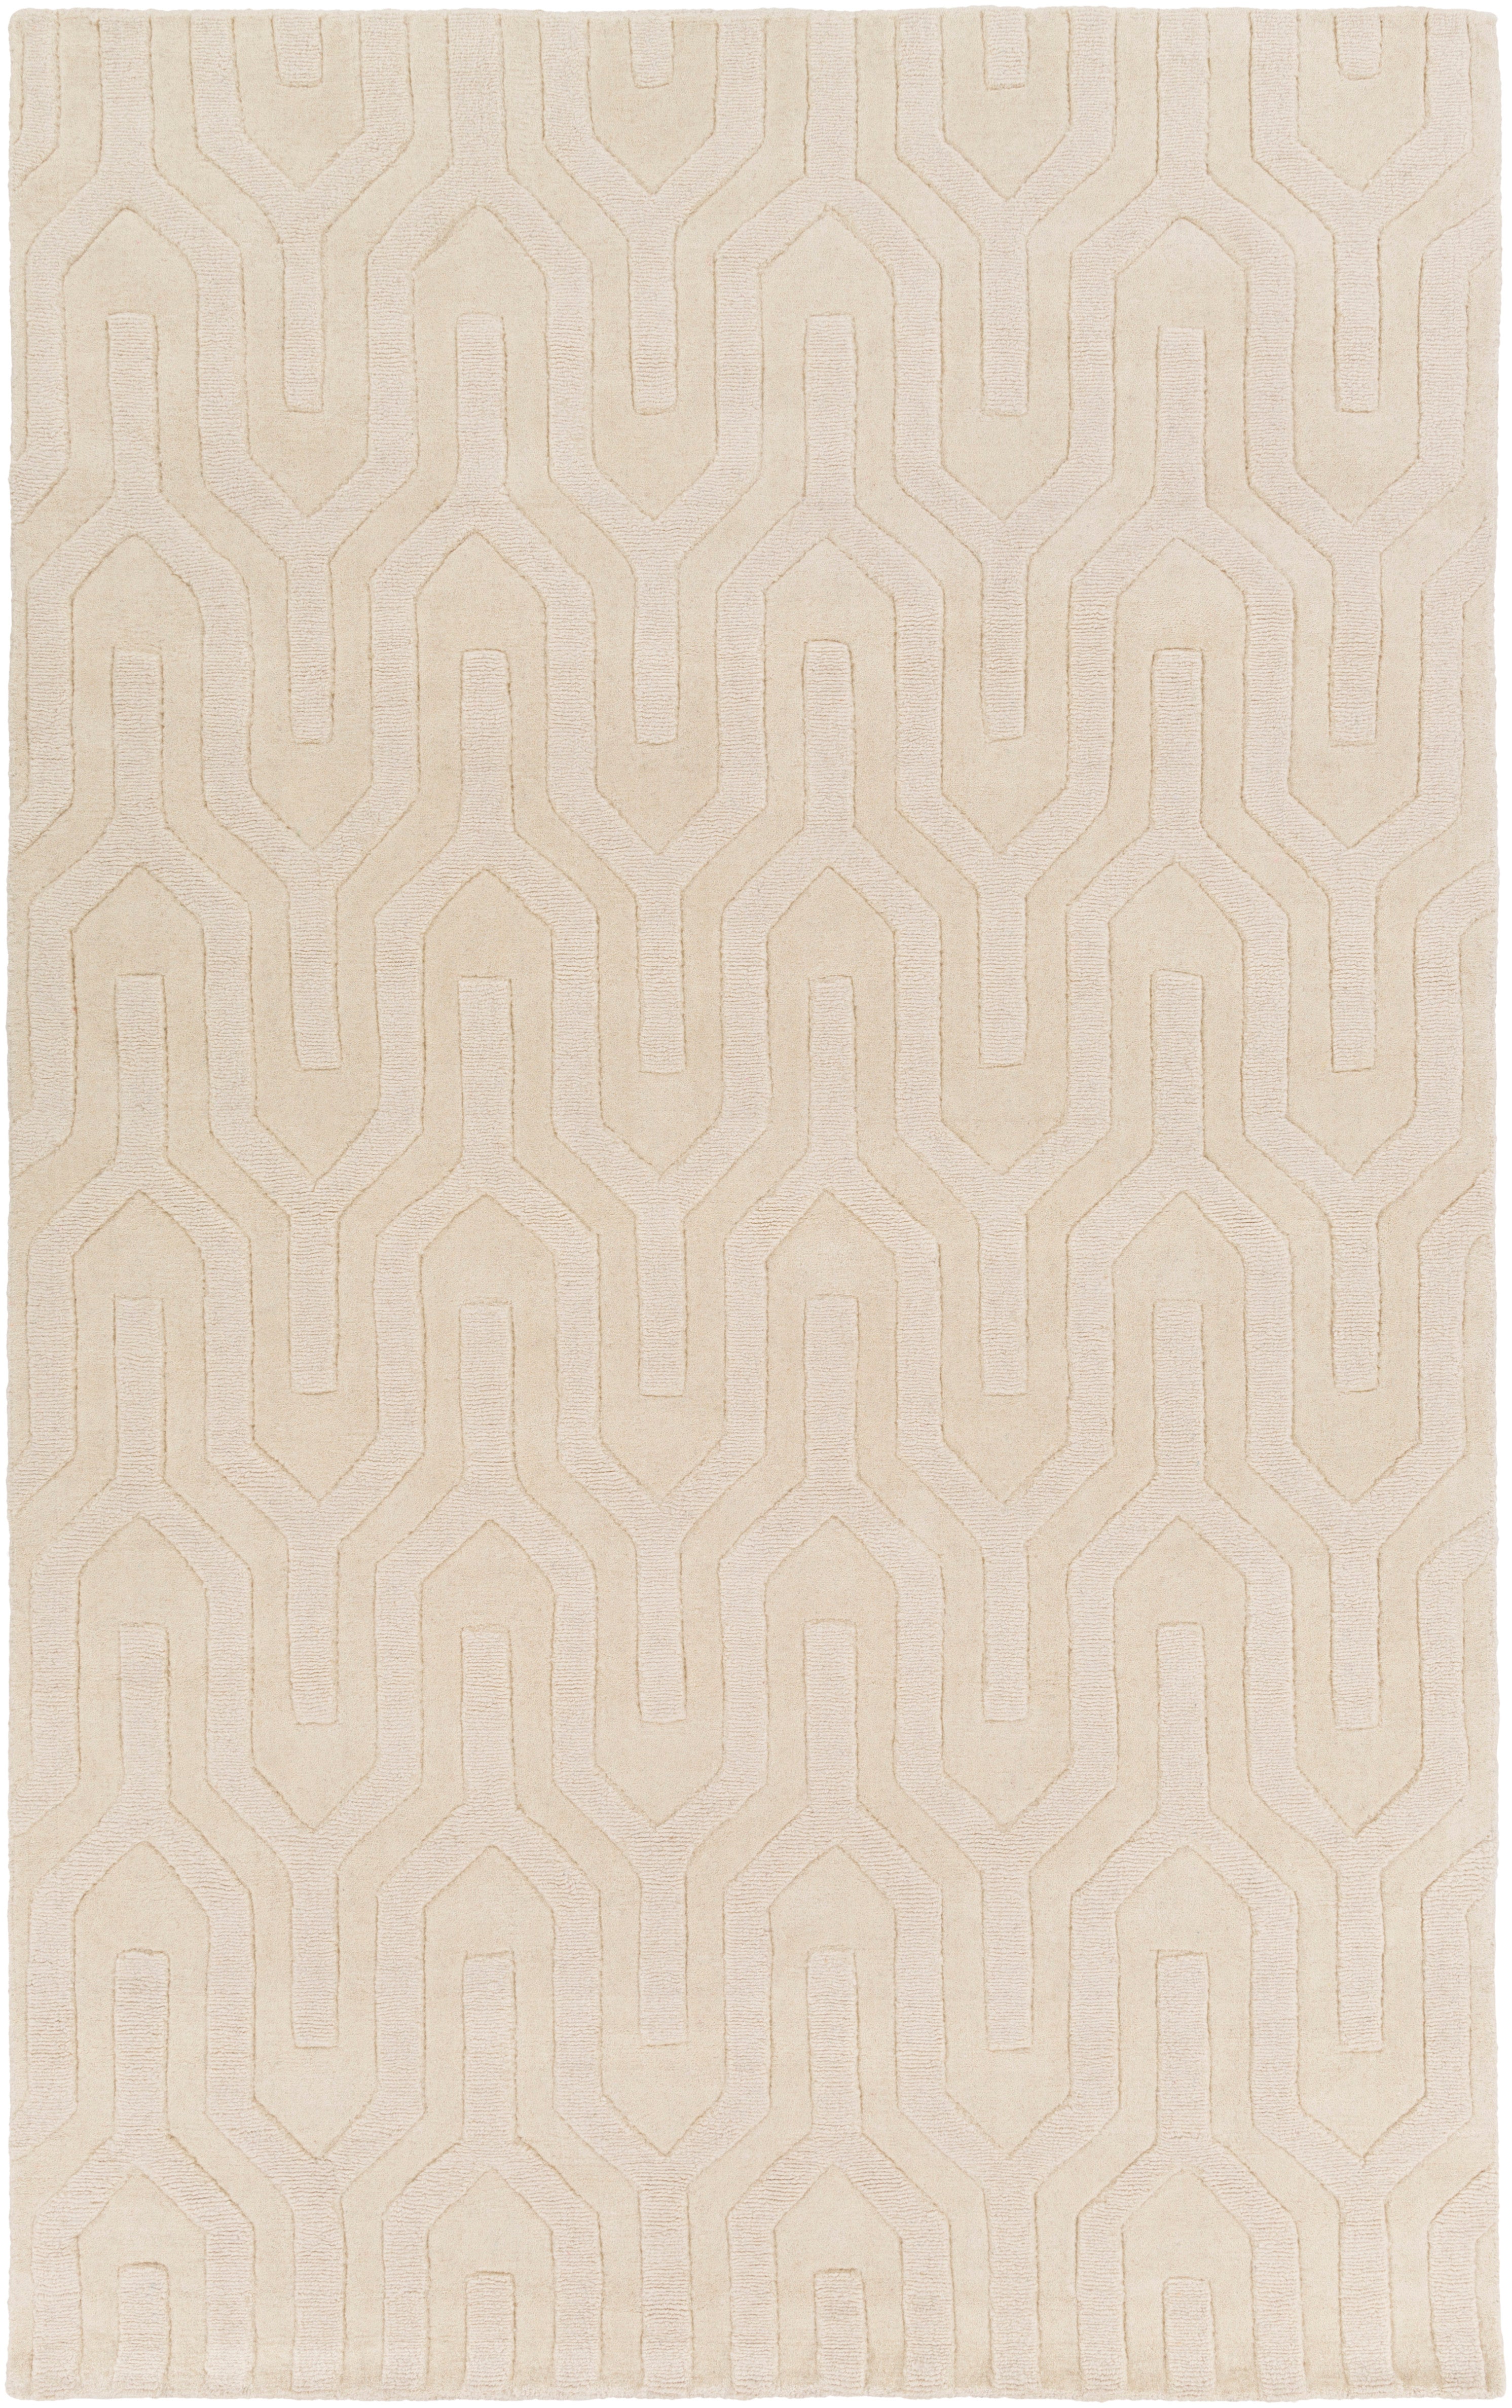 Surya Mystique M5385 Neutral Solids and Borders Area Rug